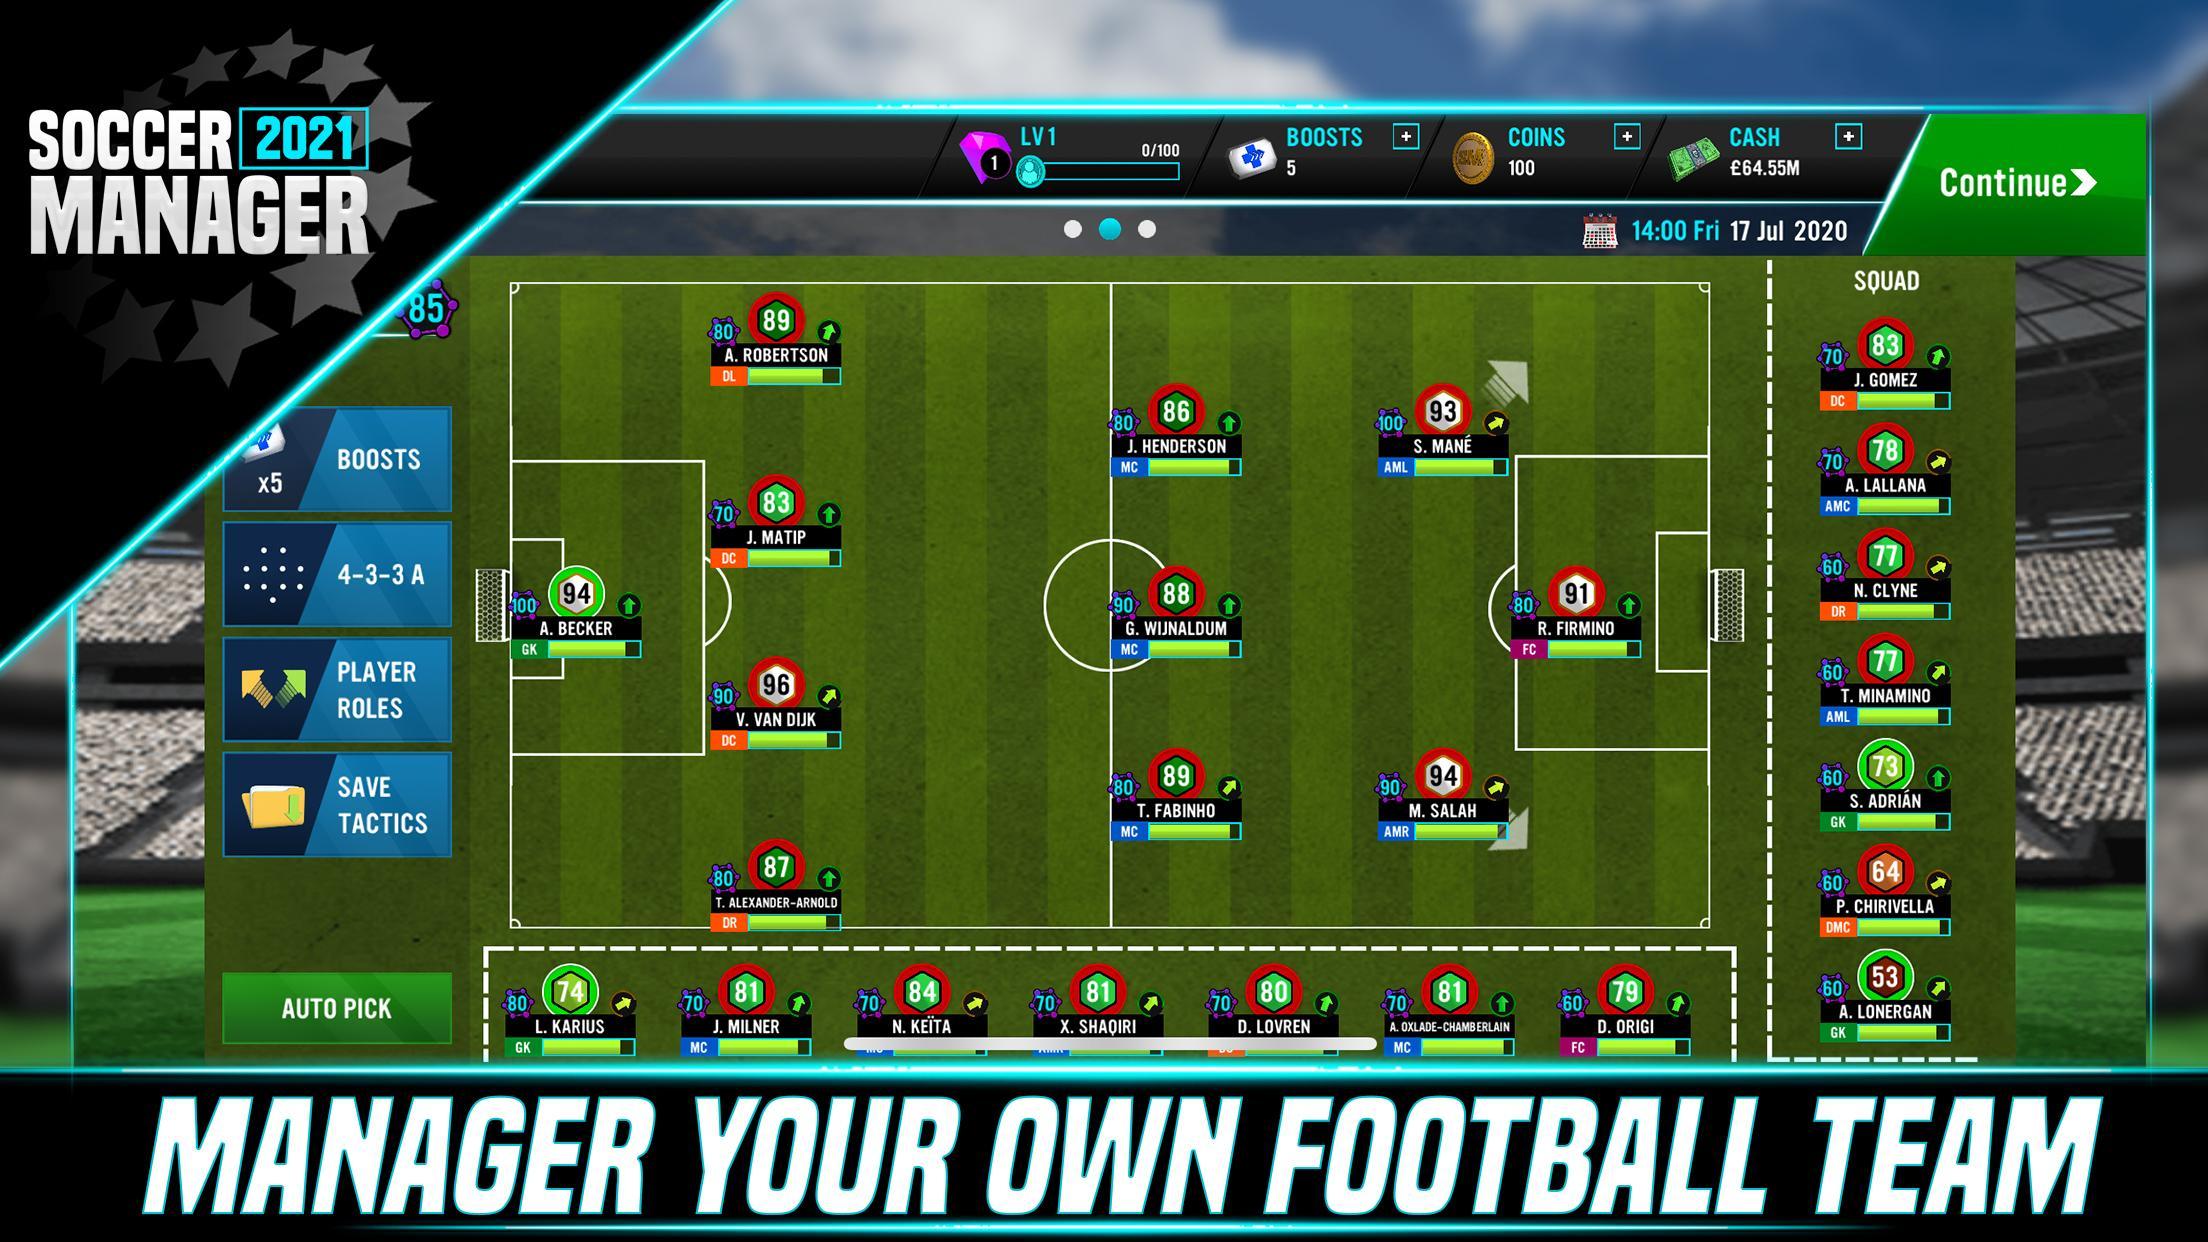 Soccer Manager 2021 - Football Management Game for Android - APK Download